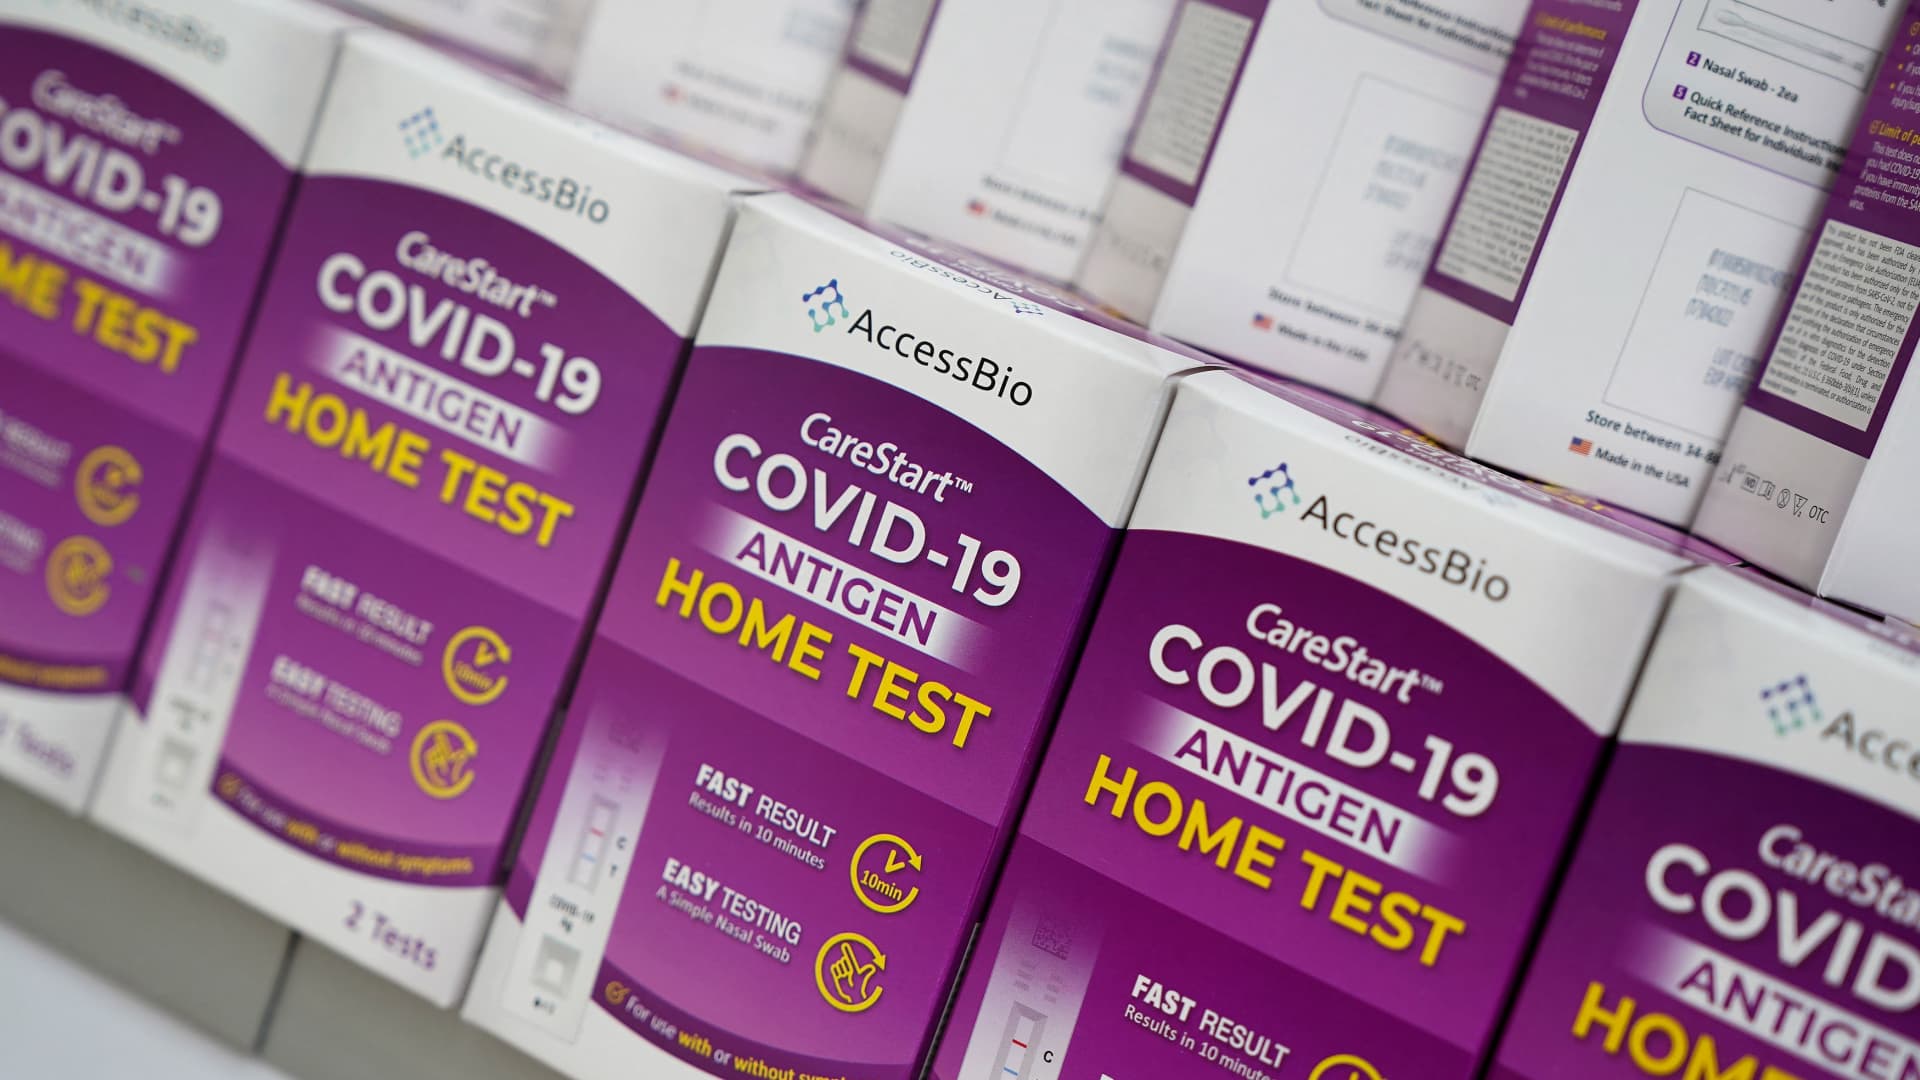 U.S. to offer another round of free at-home Covid tests starting Monday